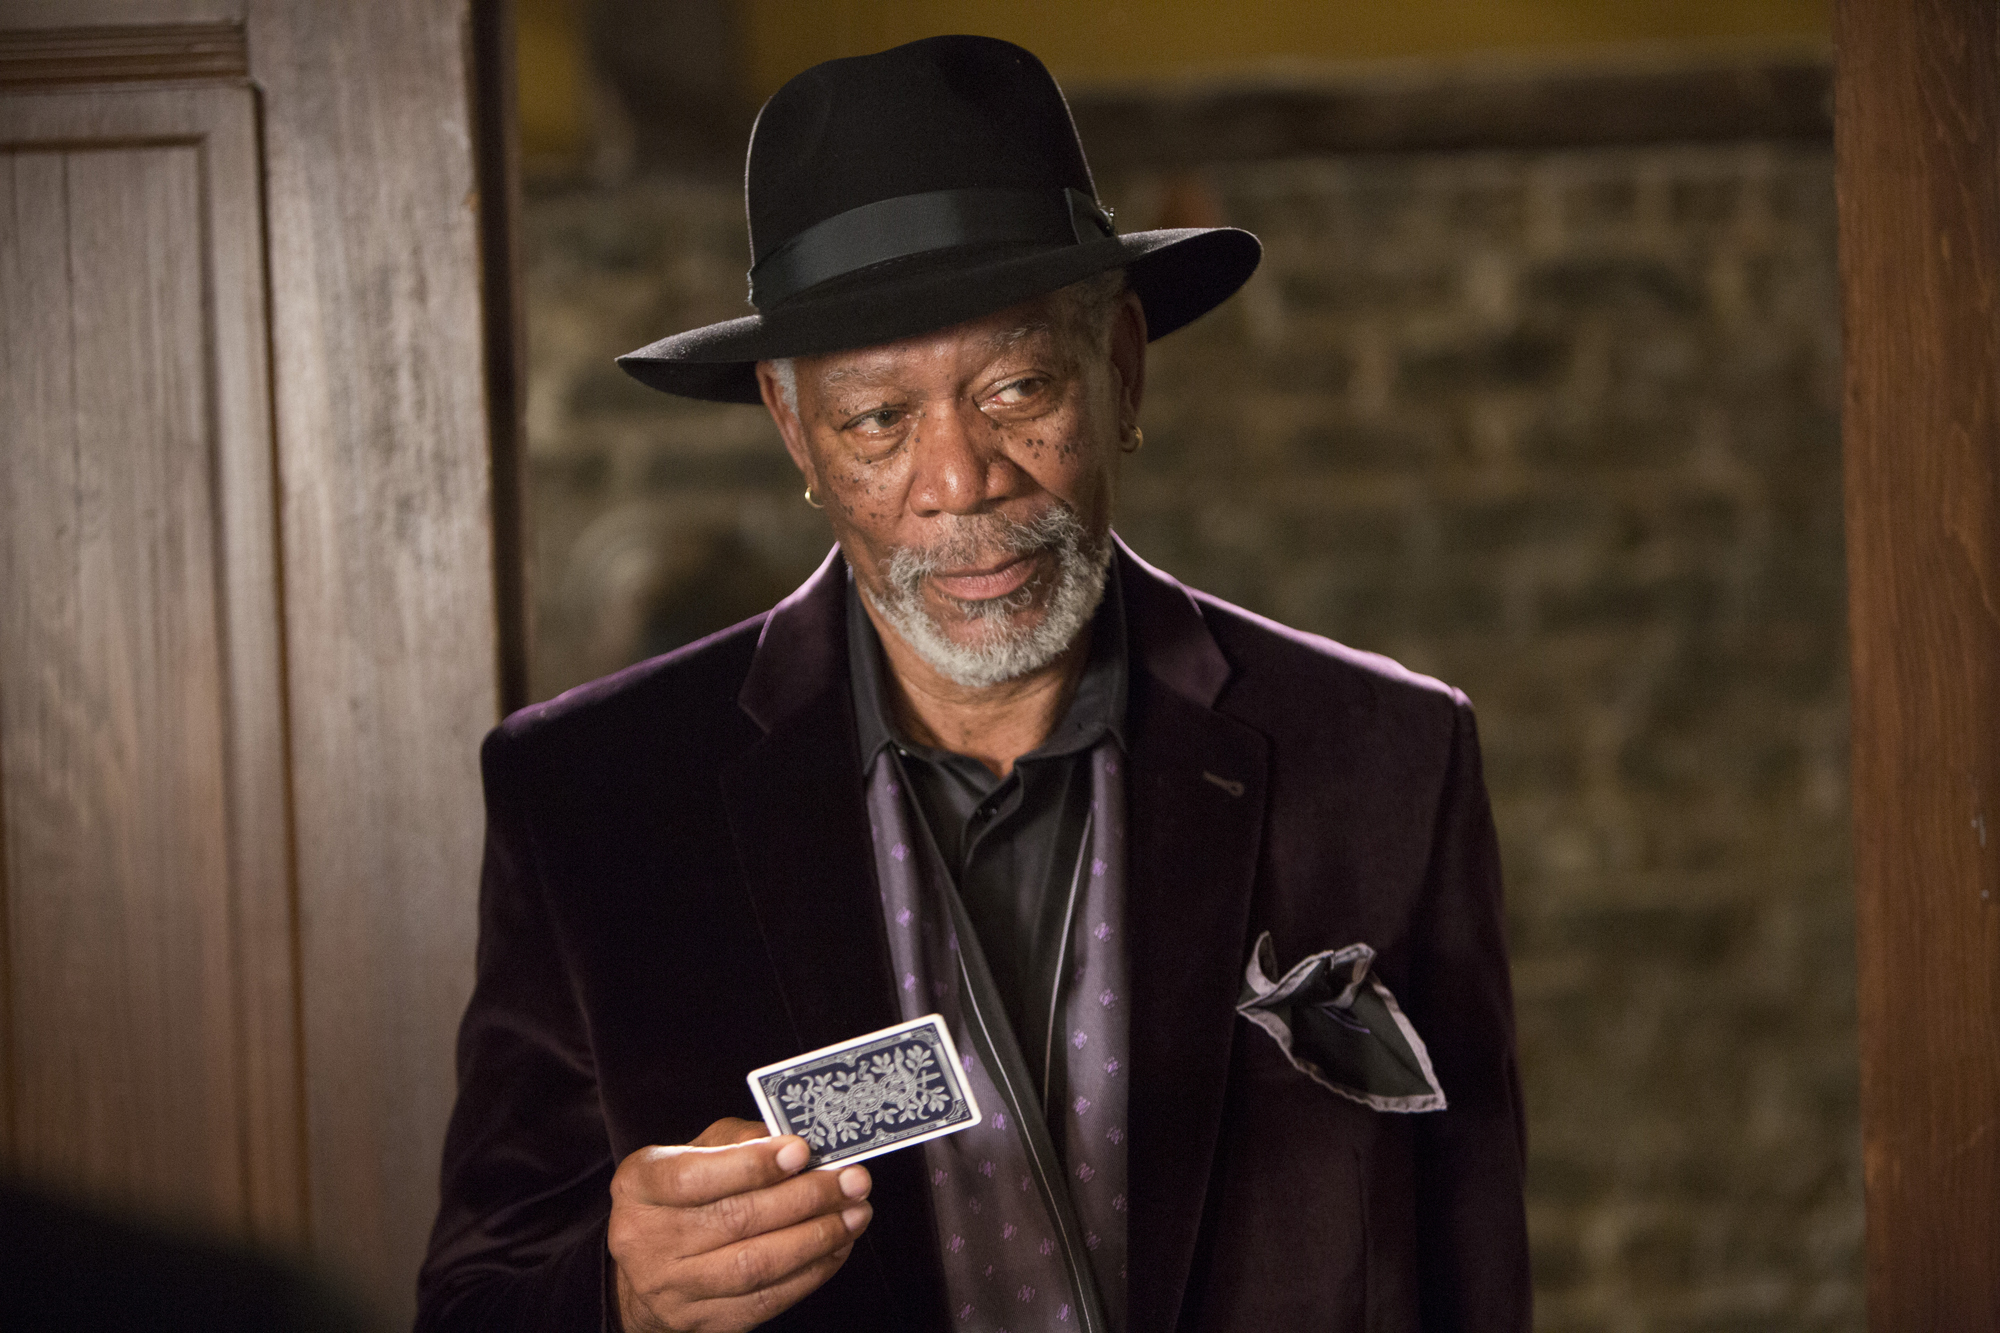 NOW YOU SEE ME Ph: Steve Dietl © 2014 Summit Entertainment, LLC. All rights reserved.